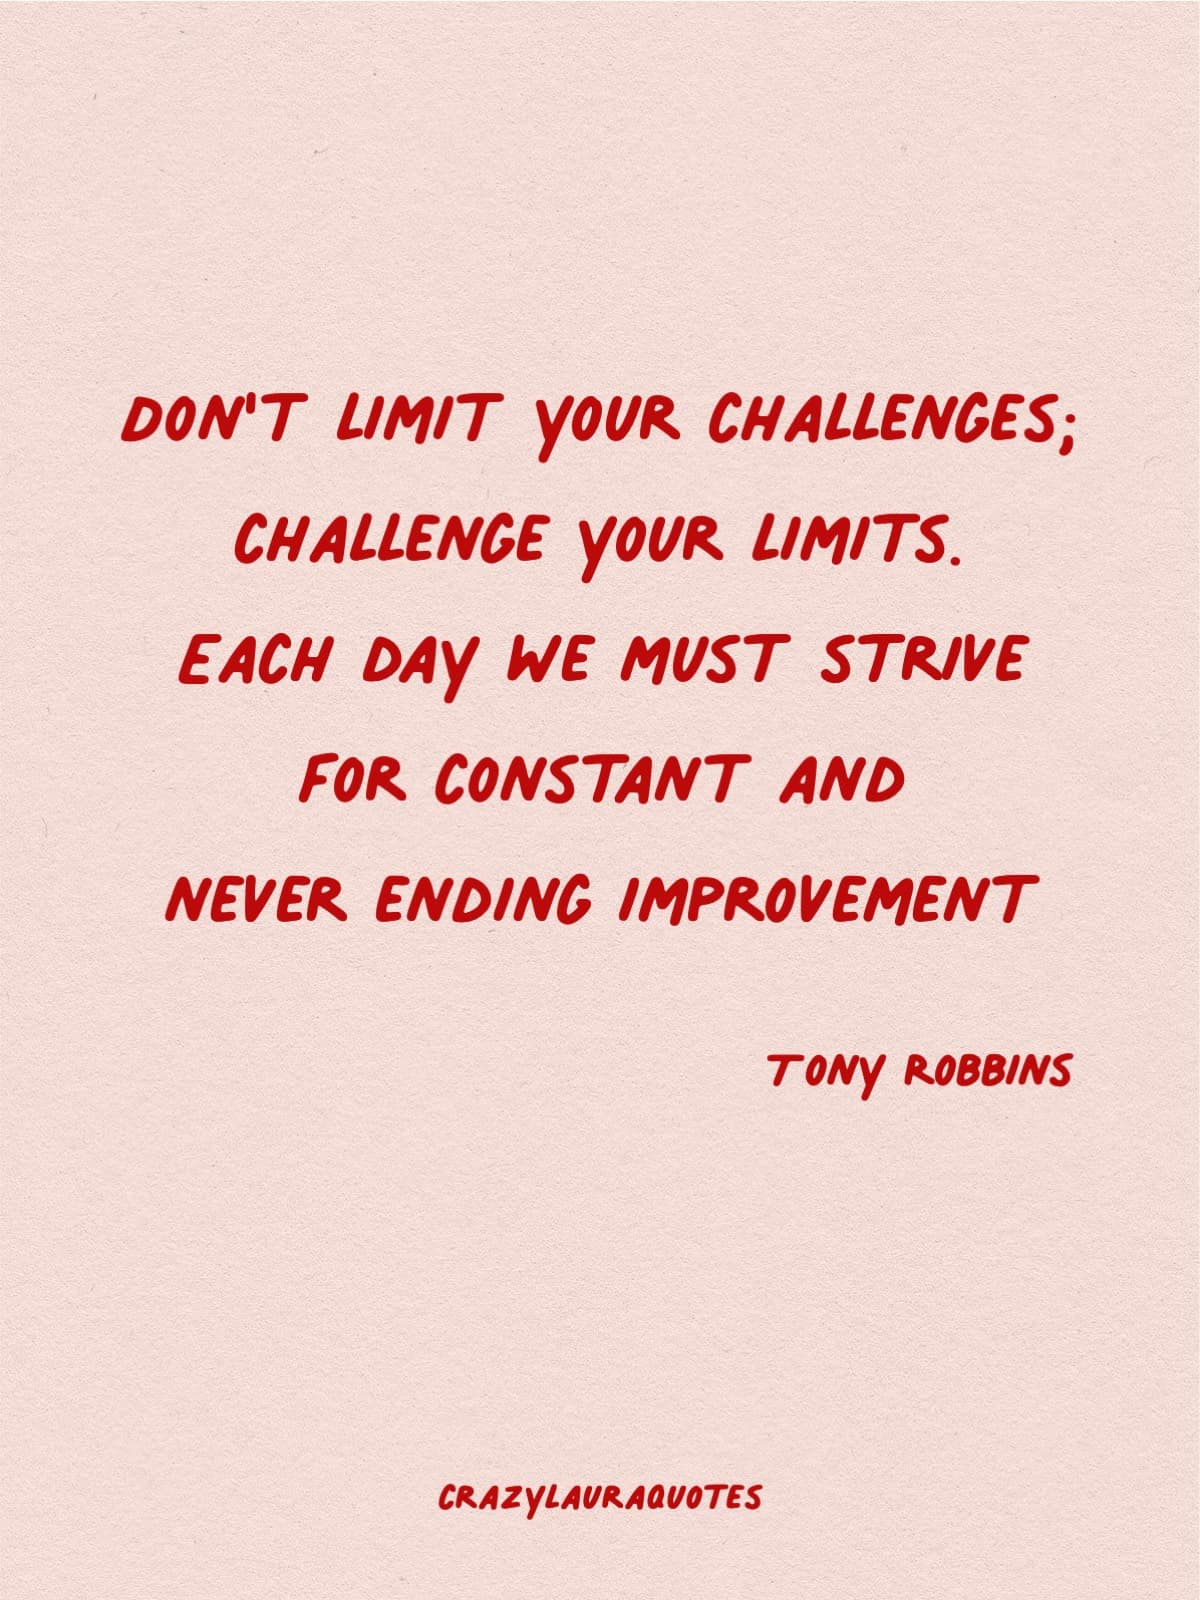 new day quote by tony robbins